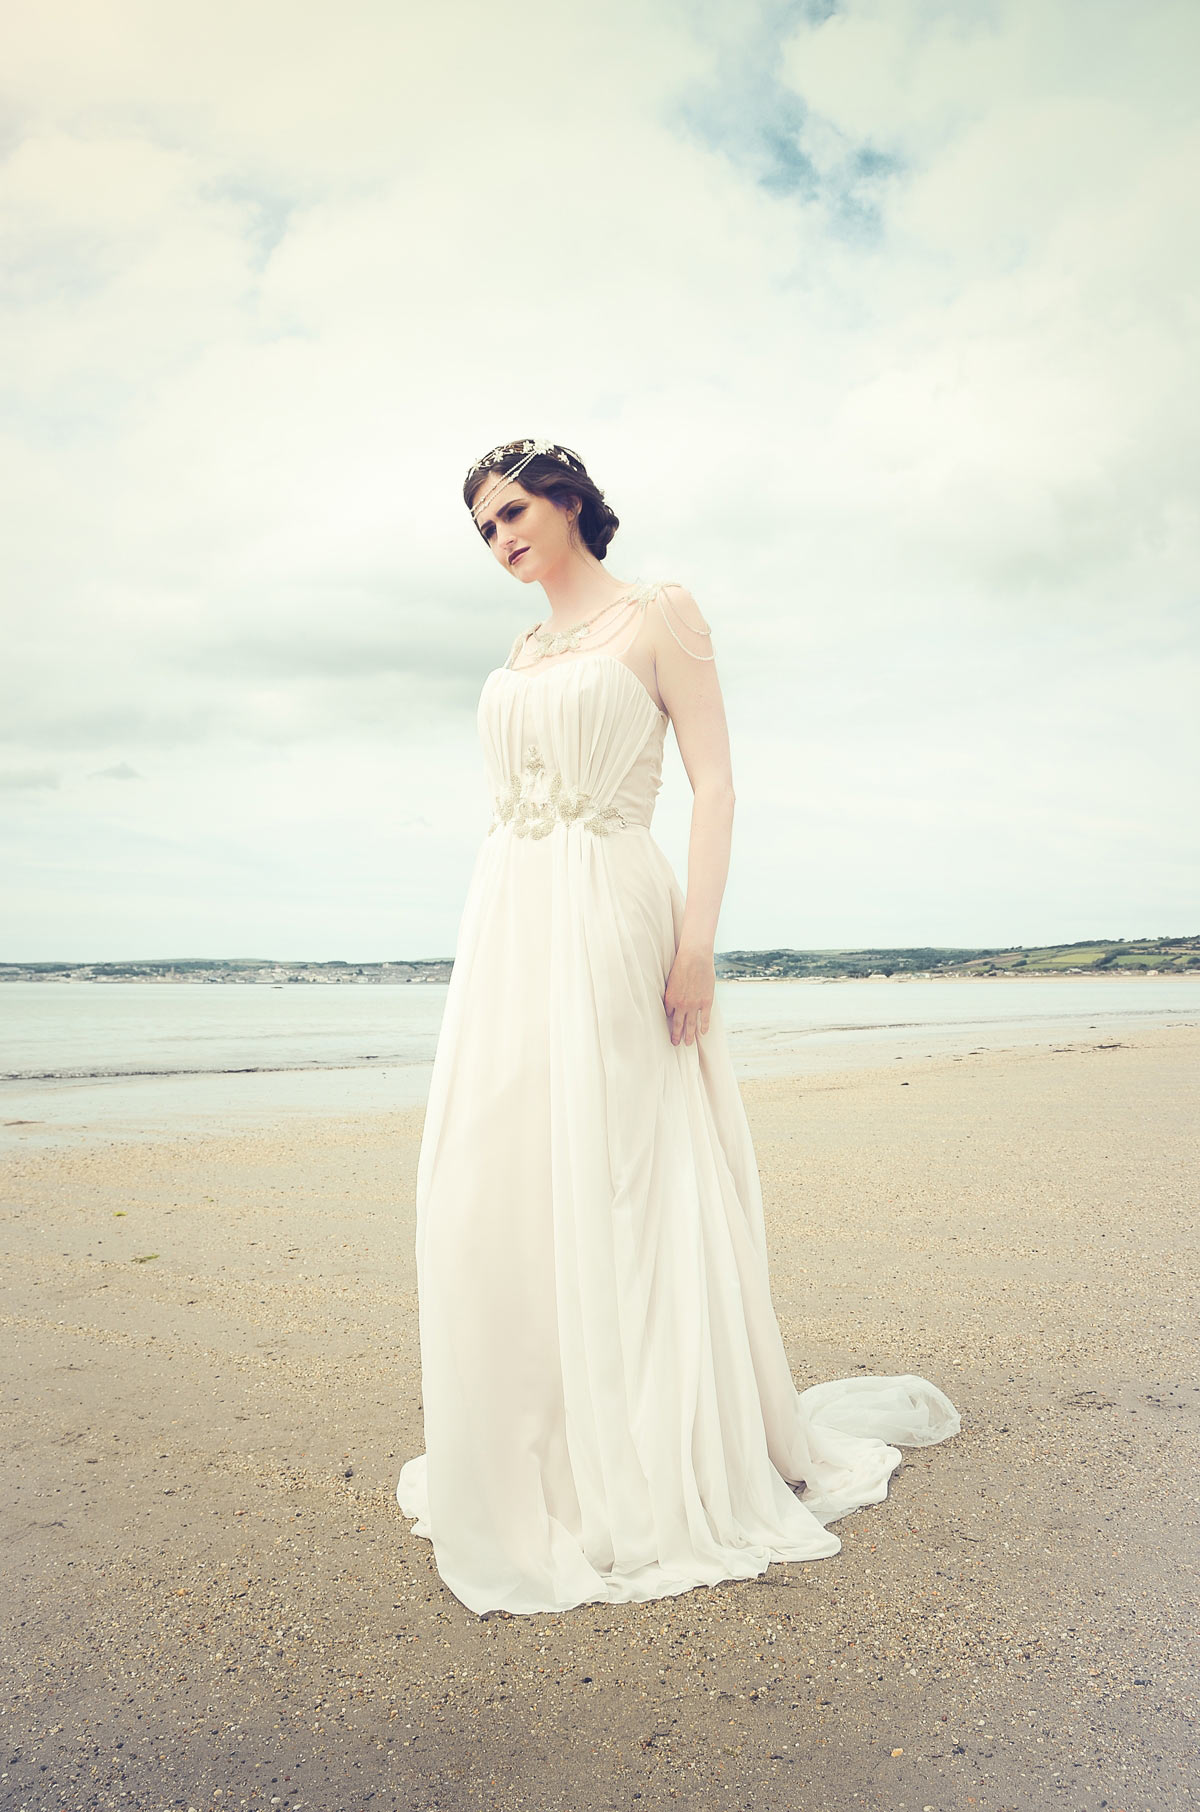 Behind the scenes of our beach bridal shoot